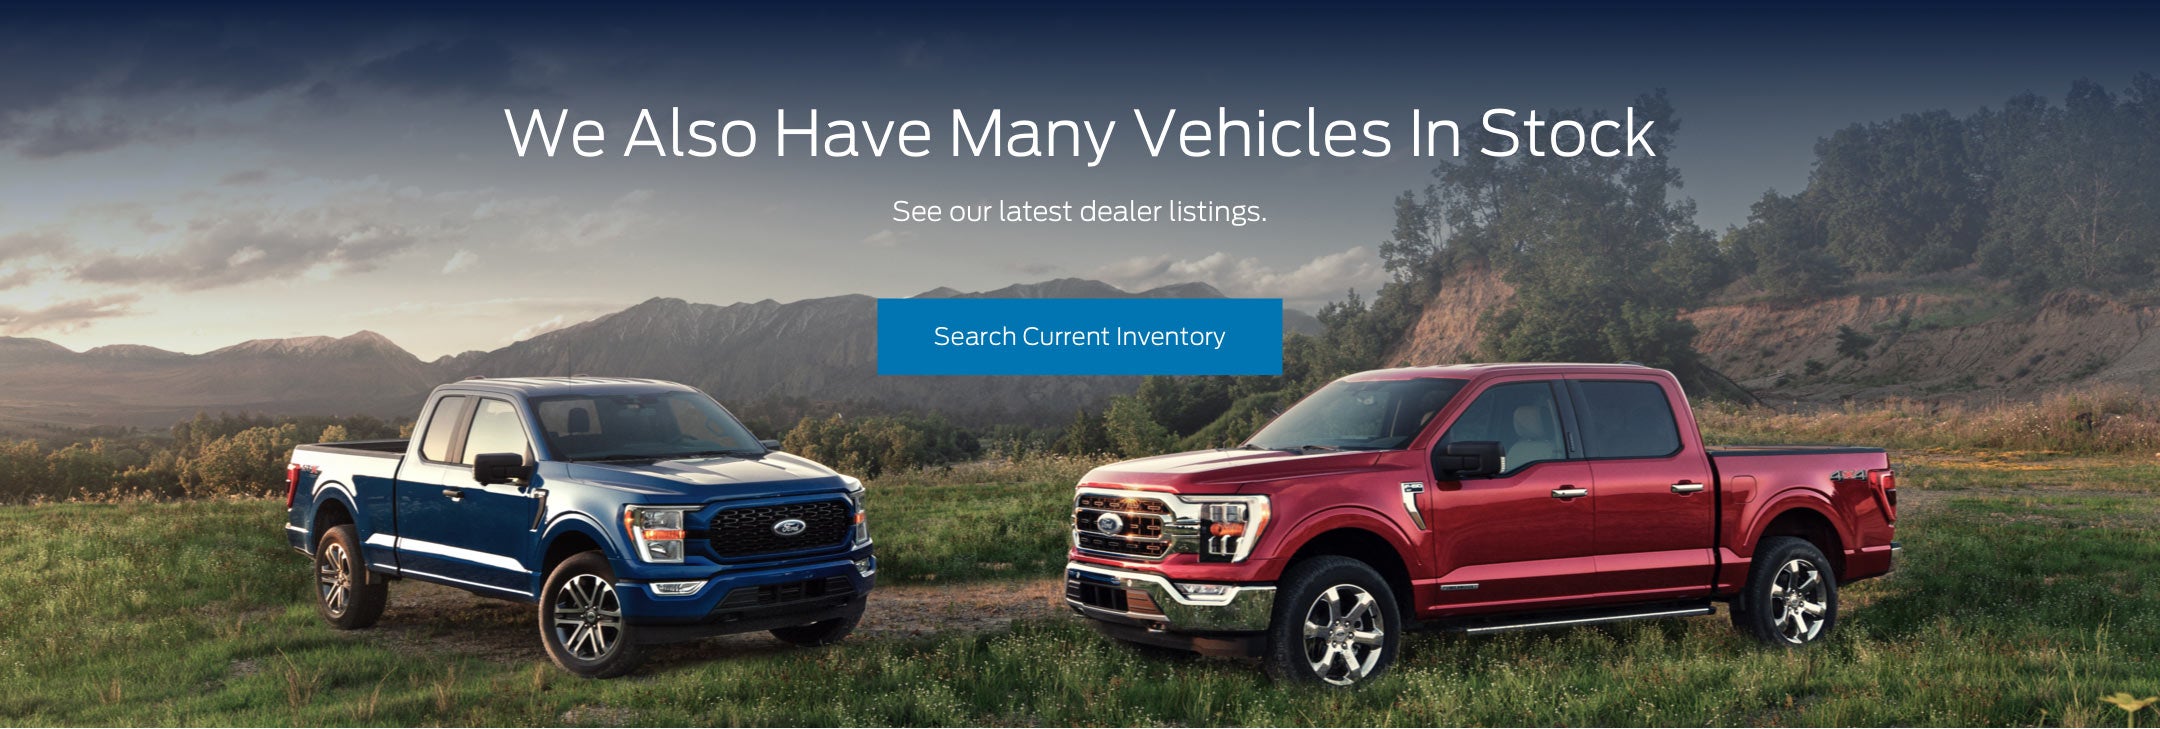 Ford vehicles in stock | Rush Truck Centers - Whittier in Whittier CA